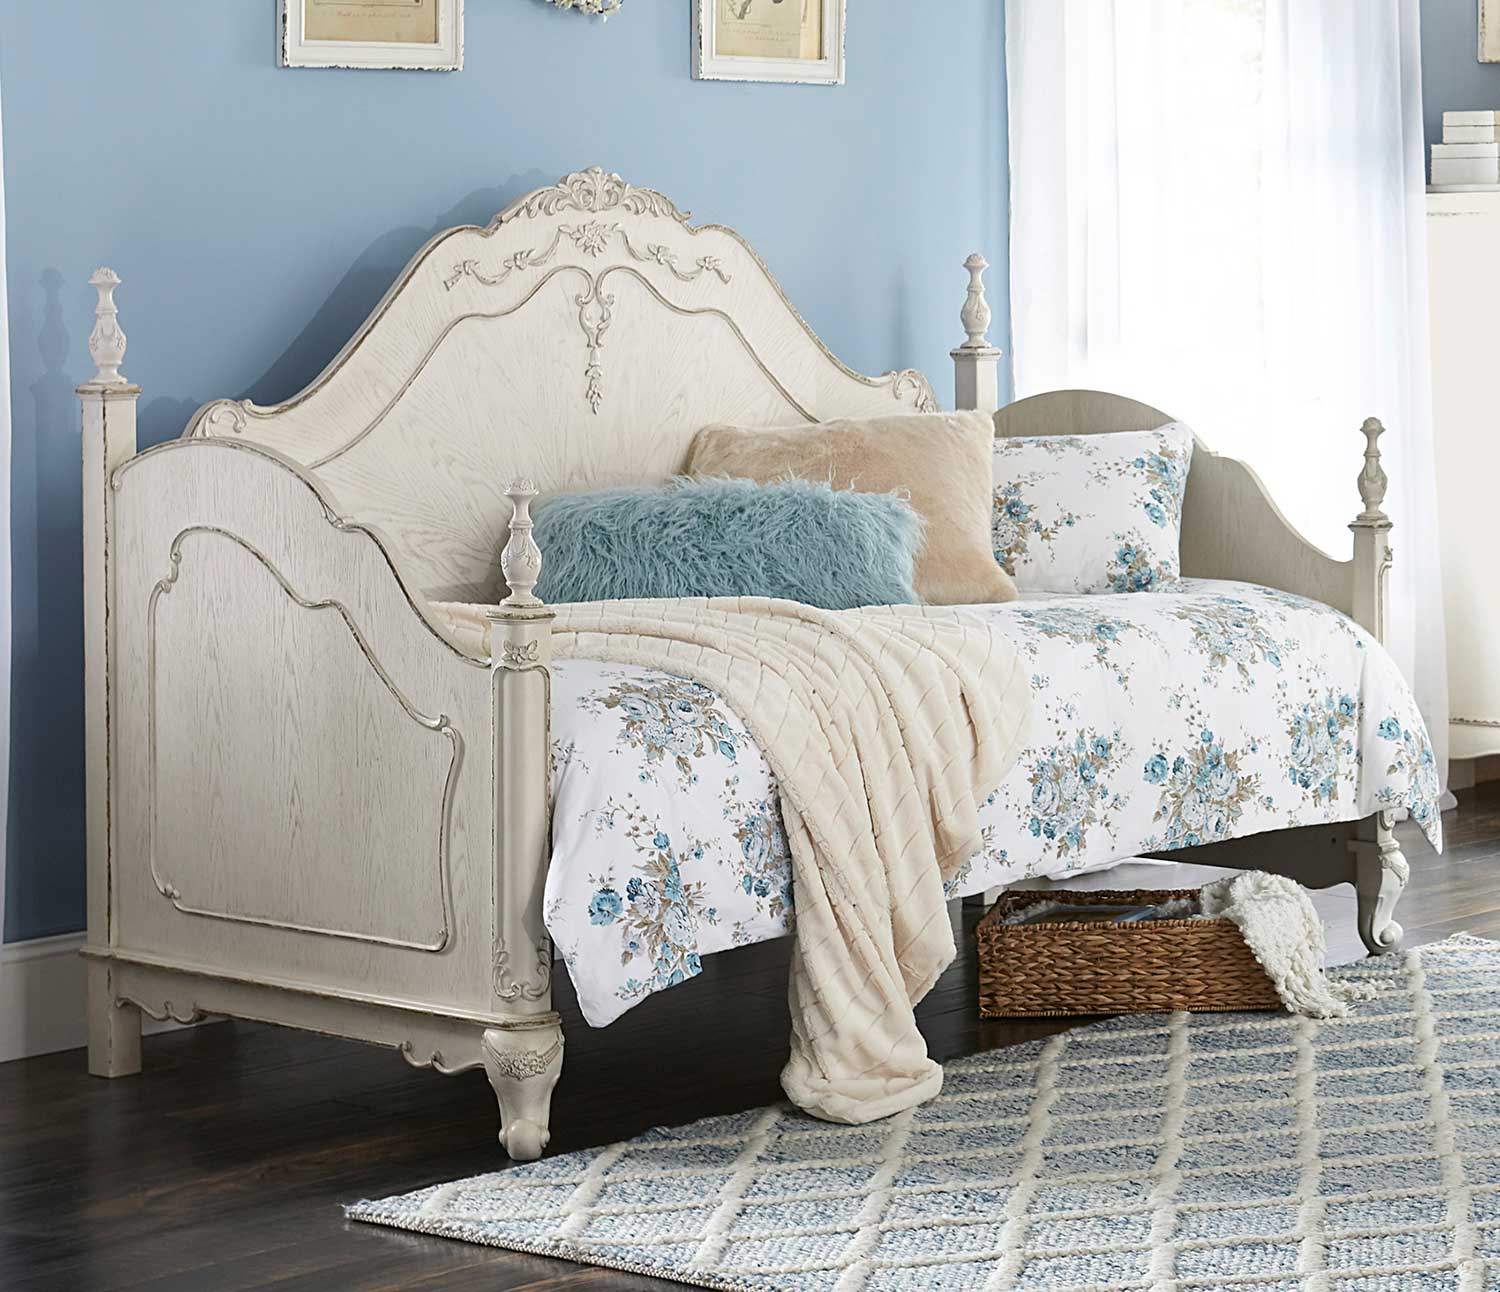 Homelegance Cinderella Daybed - Antique White with Gray Rub-Through